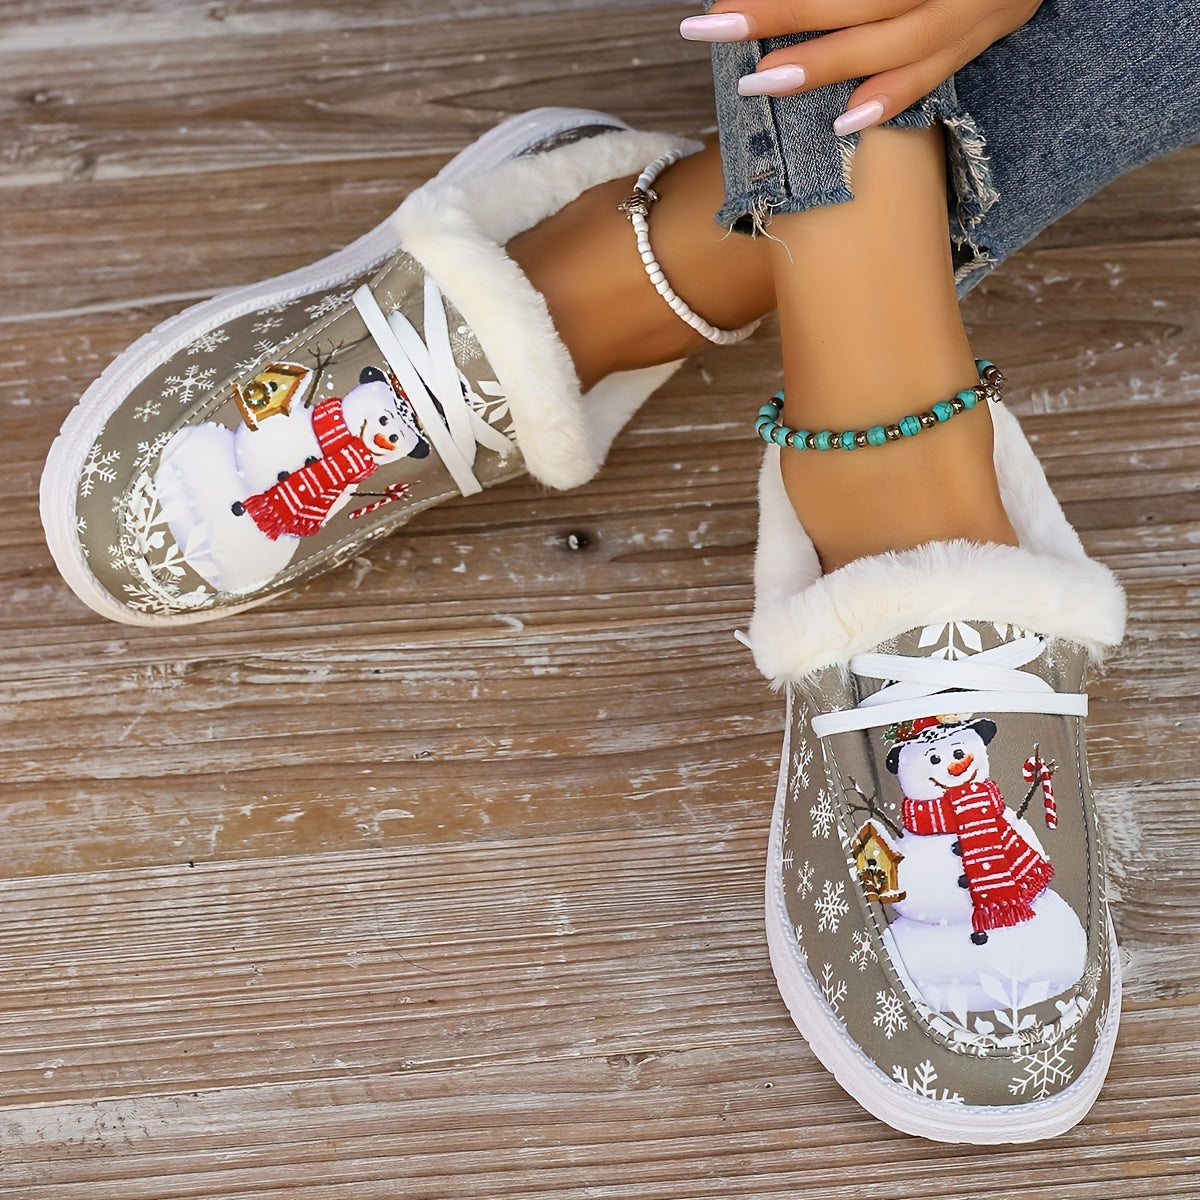 Women's Snowman Pattern Canvas Shoes, Casual Lace Up Outdoor Shoes, Lightweight Low Top Plush Lined Christmas Sneakers